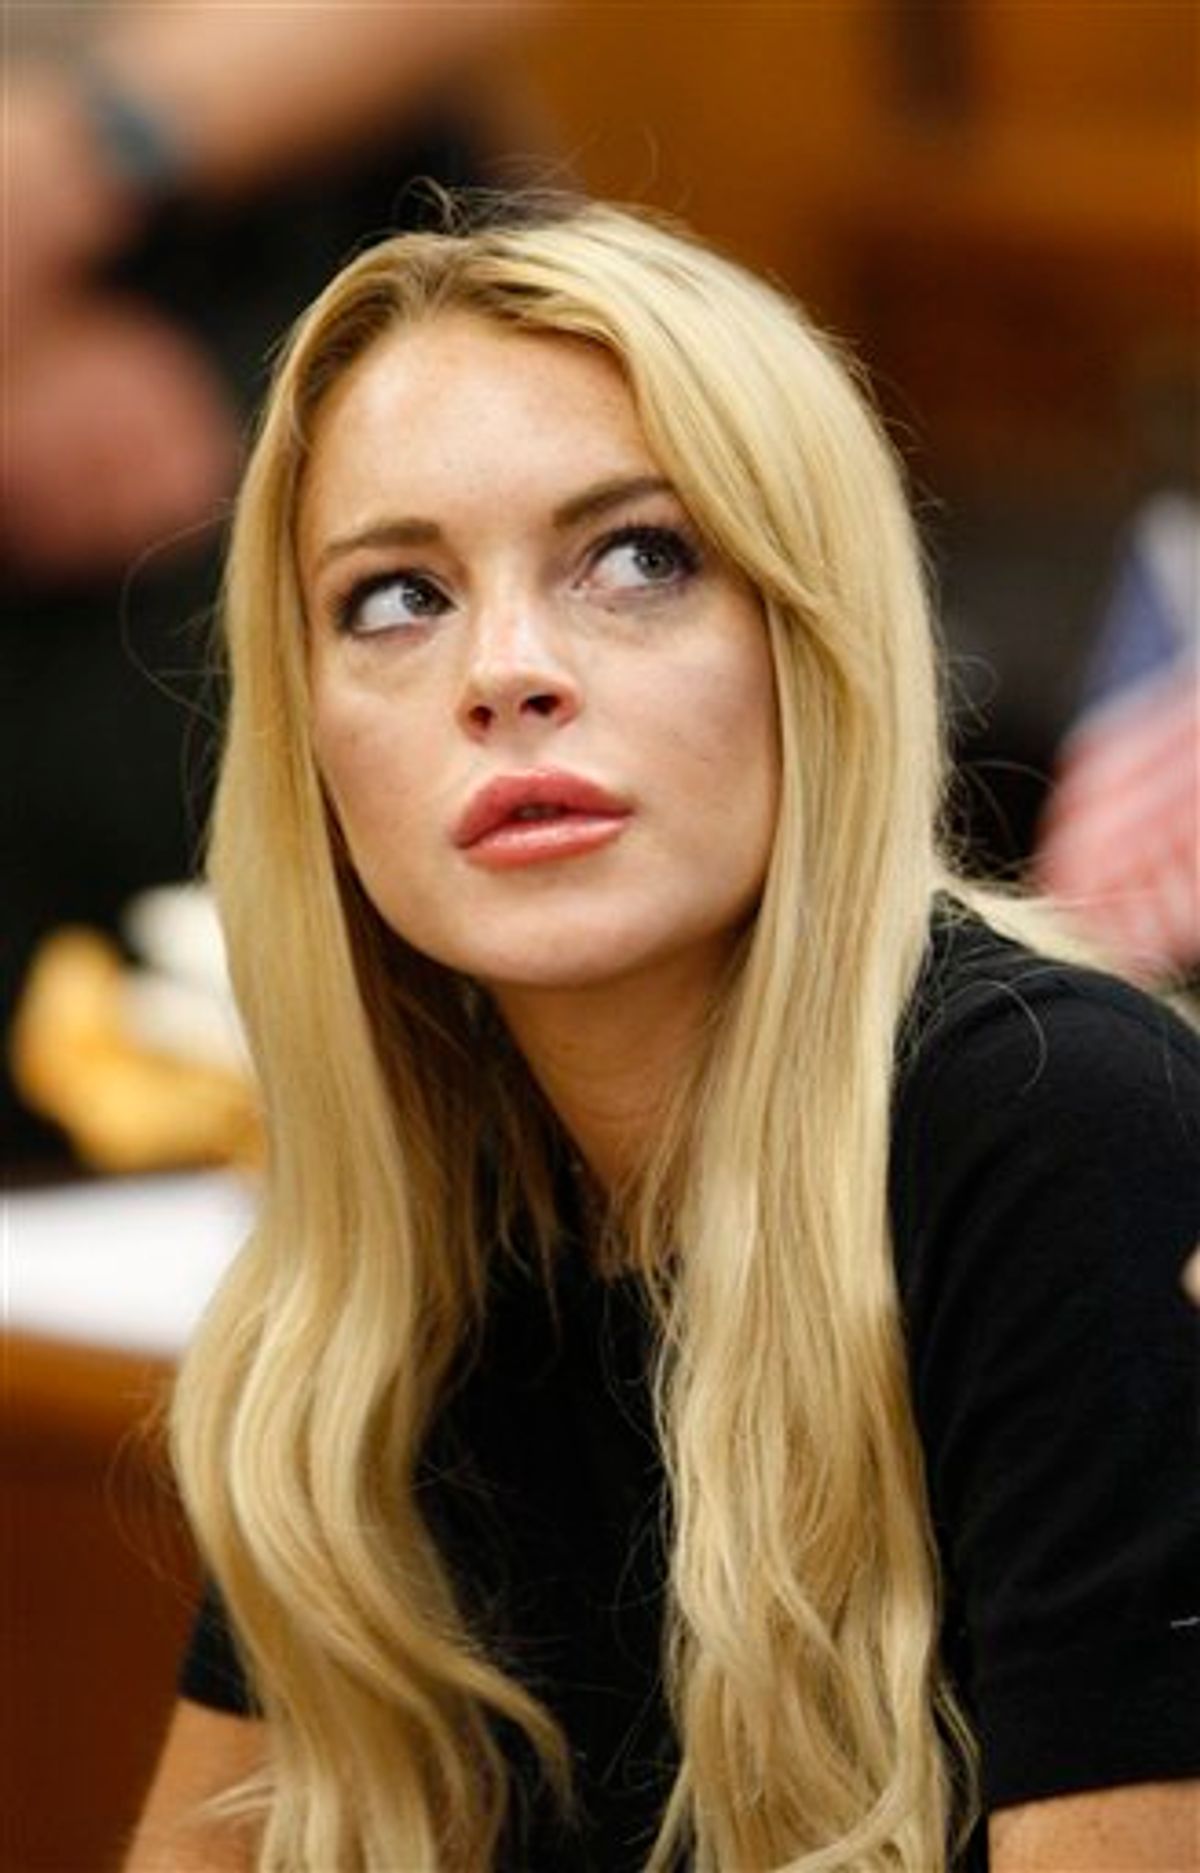 FILE - In this July 6, 2010 file photo, actress Lindsay Lohan appears in a courtroom for a probation revocation hearing in Beverly Hills, Calif. Lohan is scheduled to turn herself in Tuesday, July 20, to begin serving a 90 day jail sentence for violating the terms of her probation for a 2007 drug case. (AP Photo/David McNew, Pool) (AP)